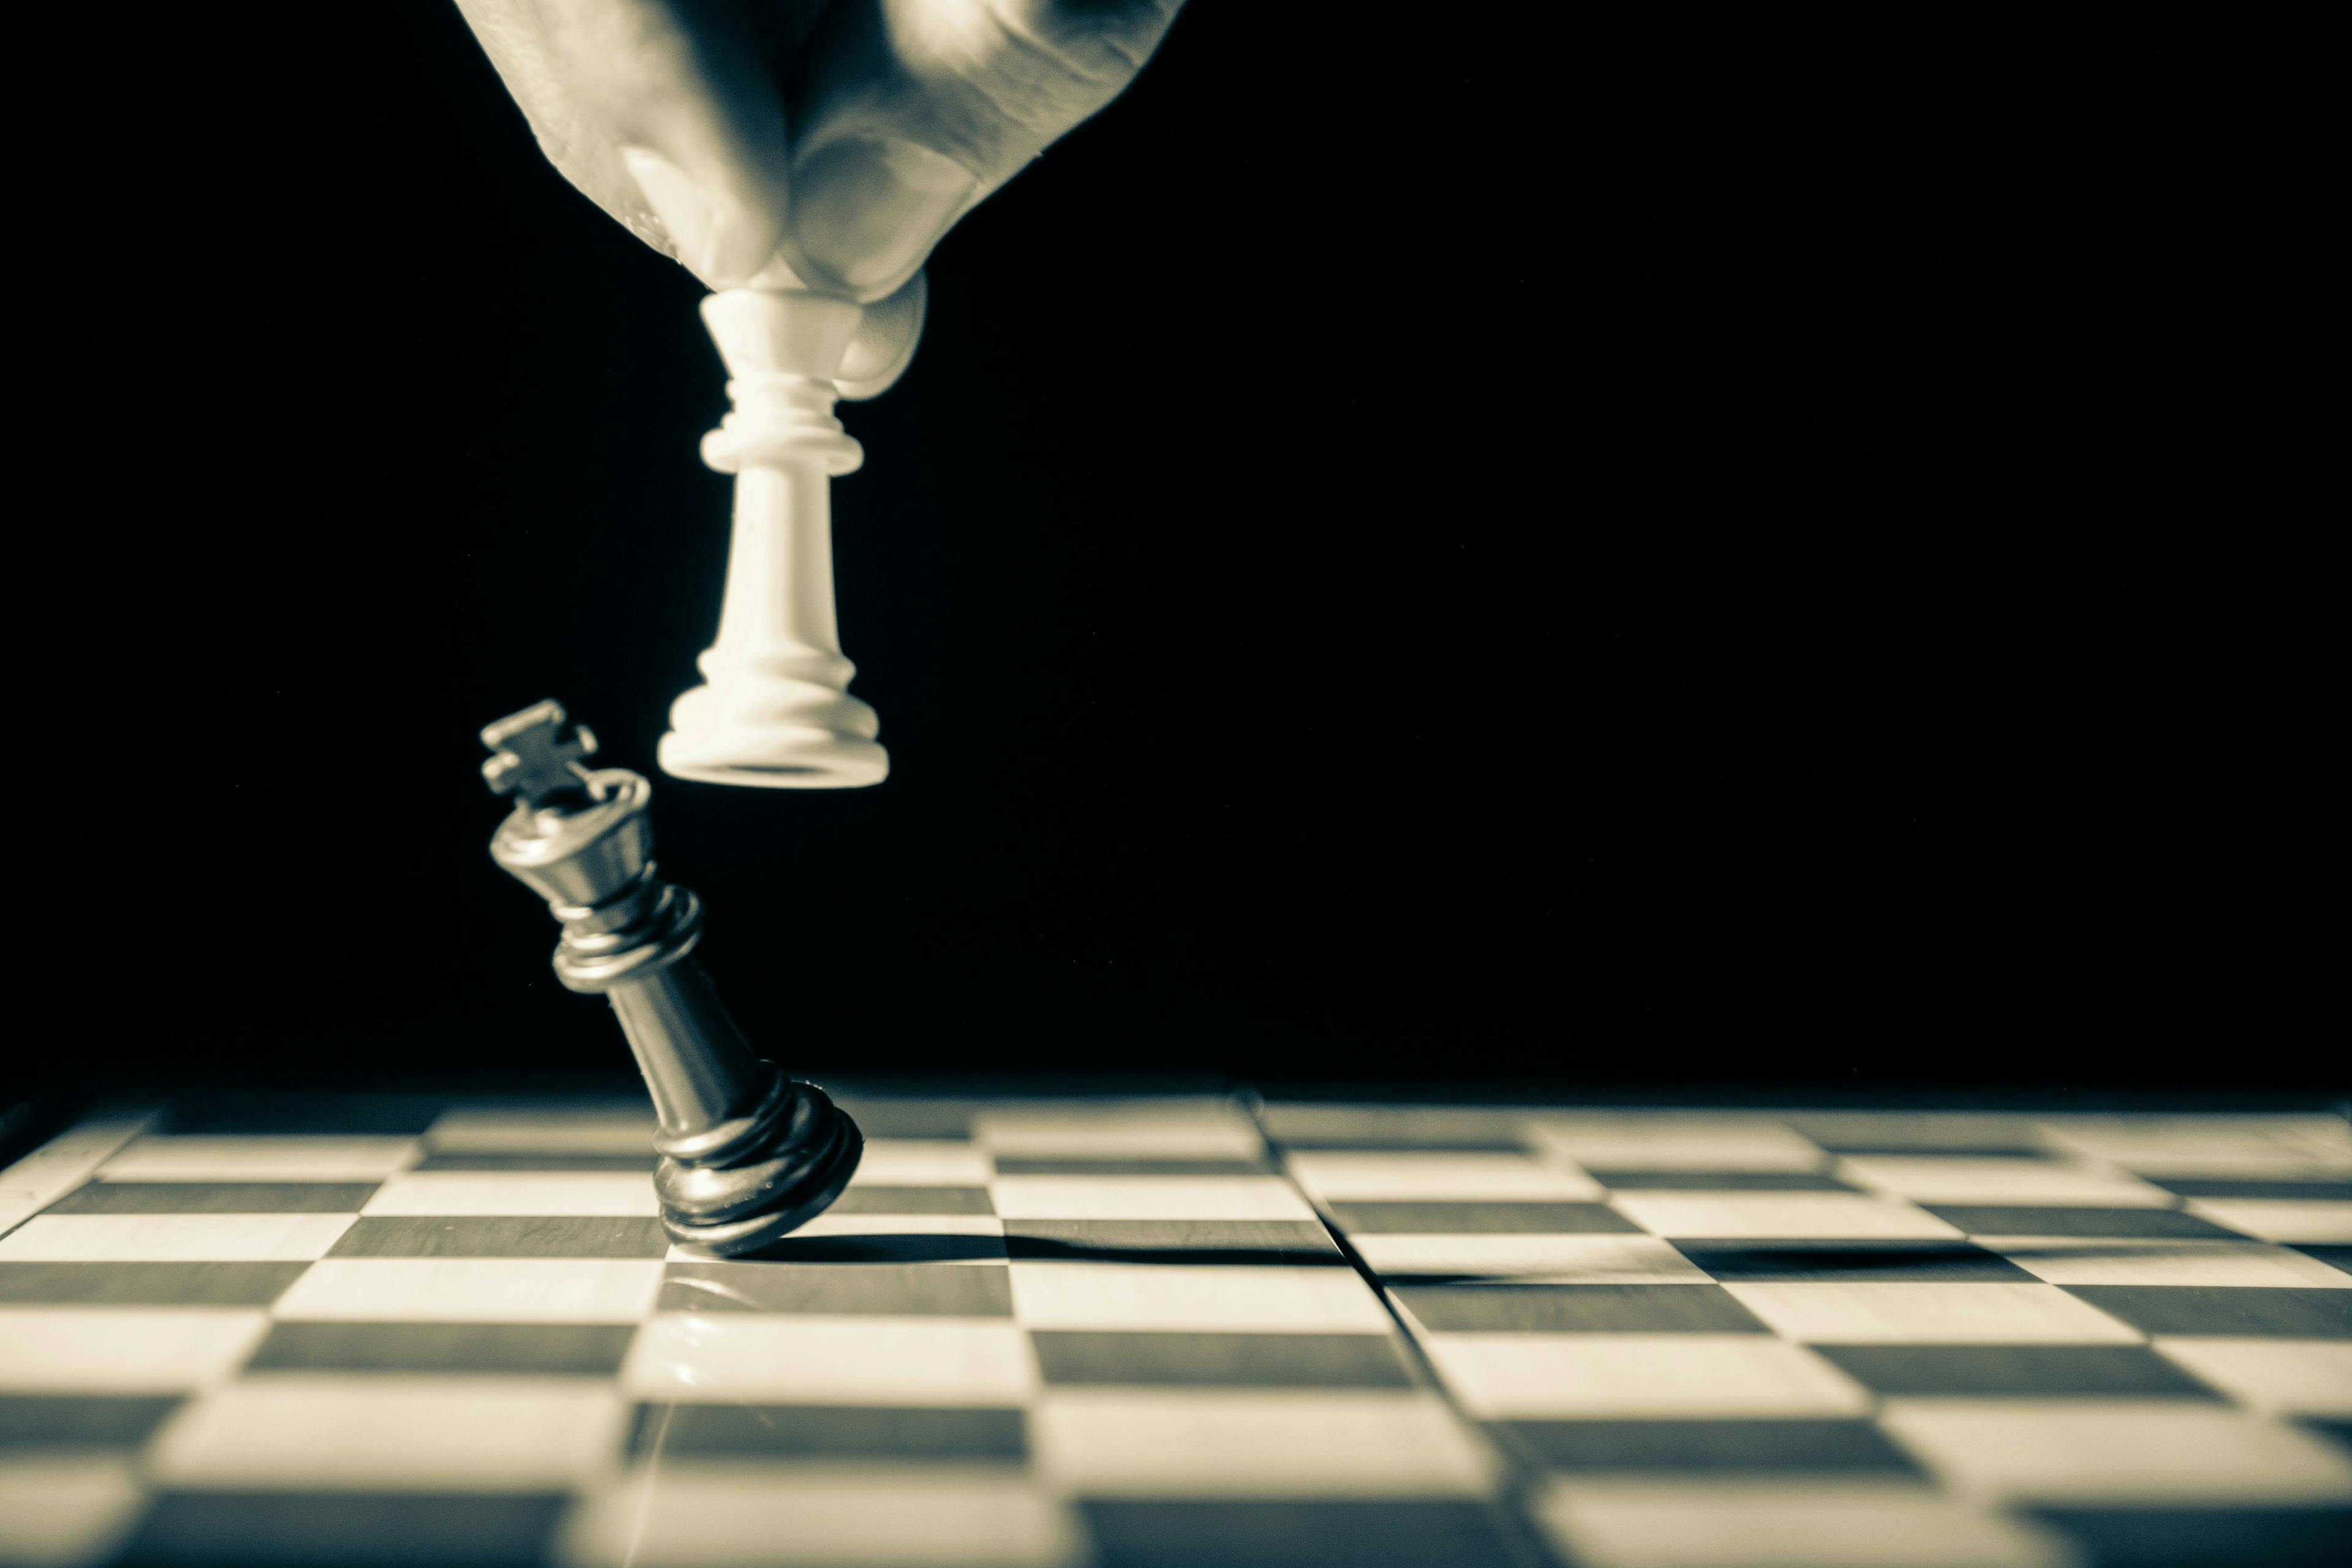 A dramatic chess scene capturing the decisive moment of checkmate with a hand confidently moving the white queen piece, indicating victory over a fallen black king, symbolizing strategic triumph and foresight.